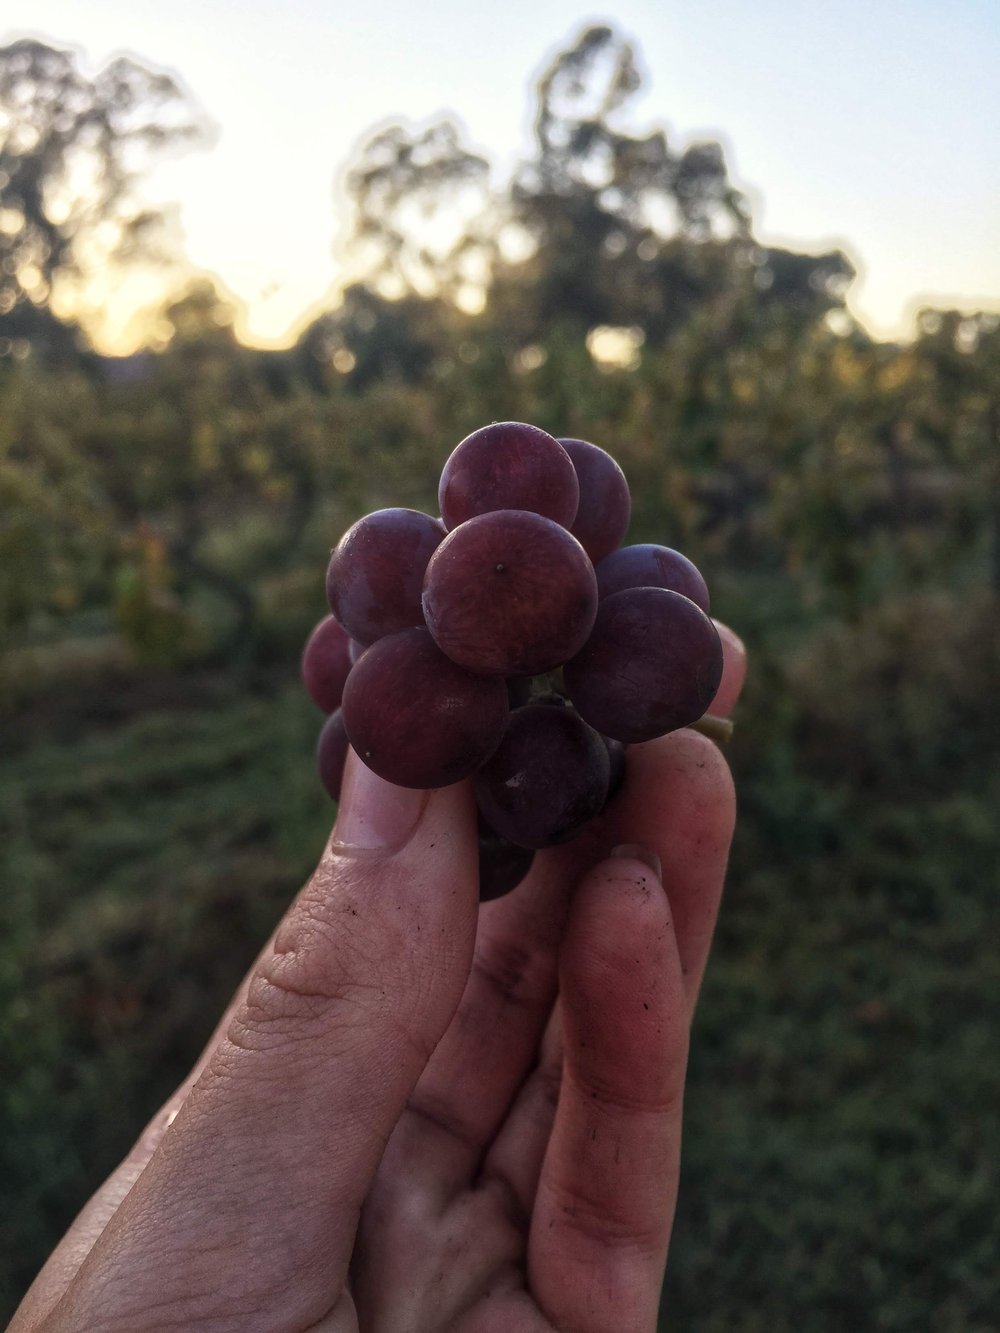 Muscat grapes Chambers in Tilly's hand.JPG